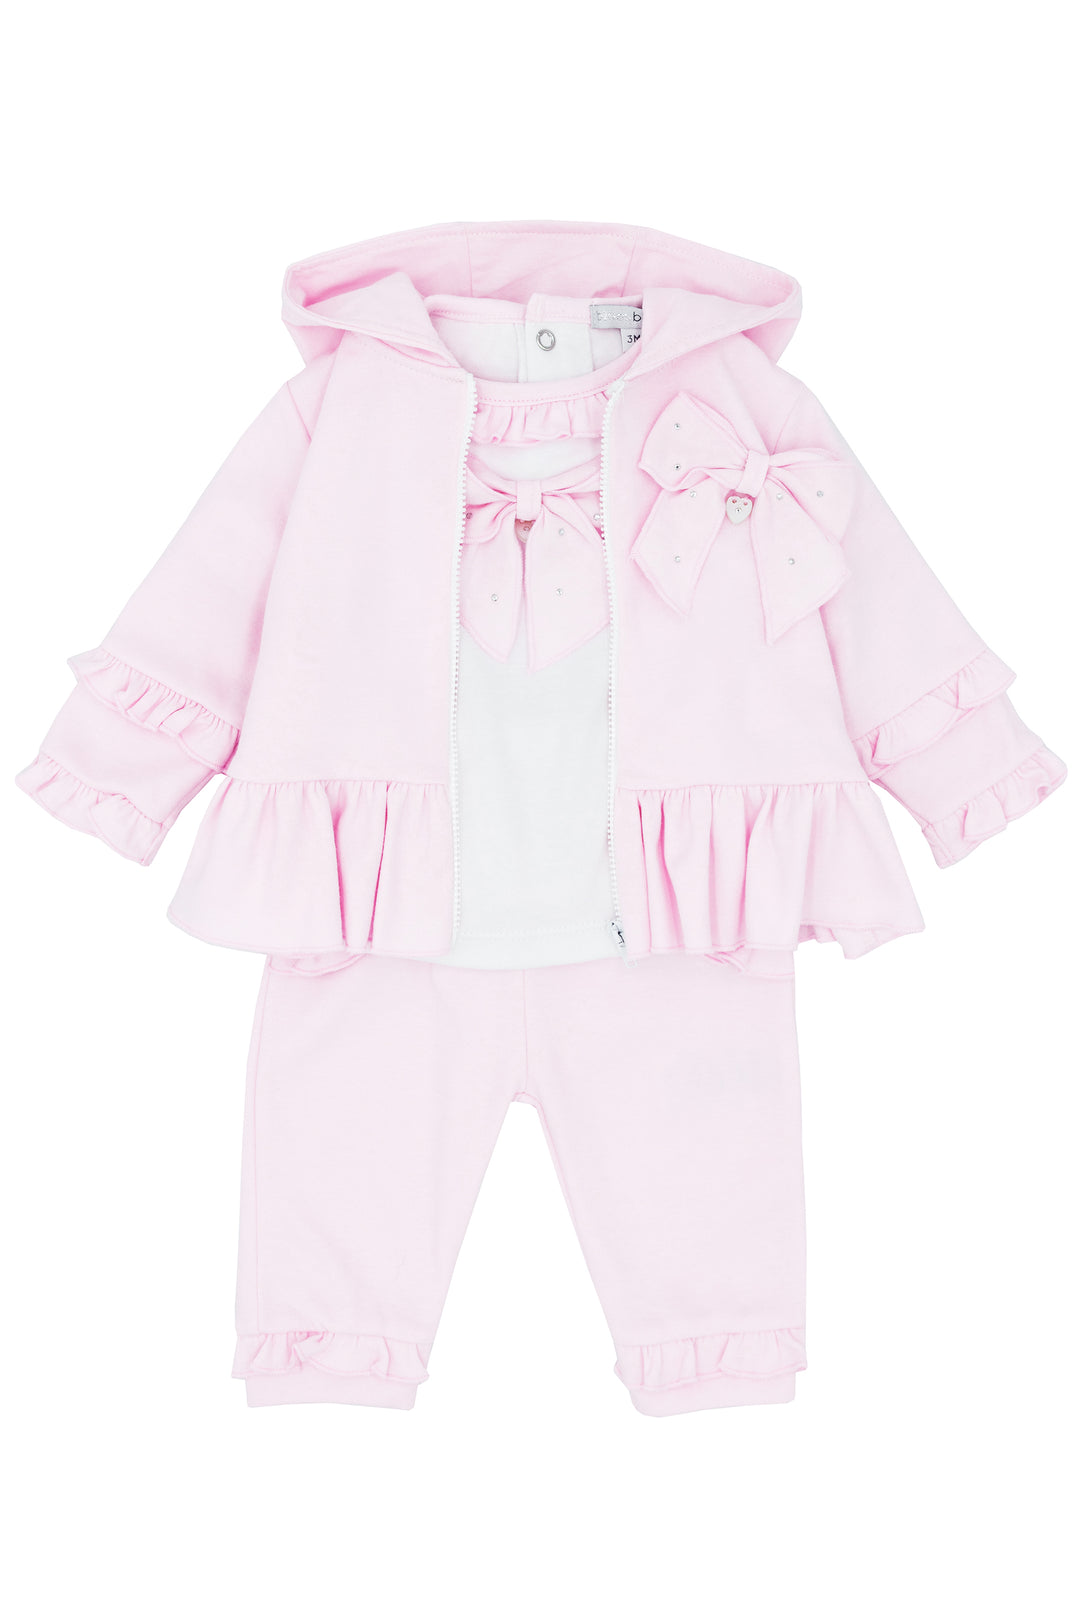 Blues Baby PREORDER "Maia" Pink Bow Jacket, Blouse & Trousers | Millie and John